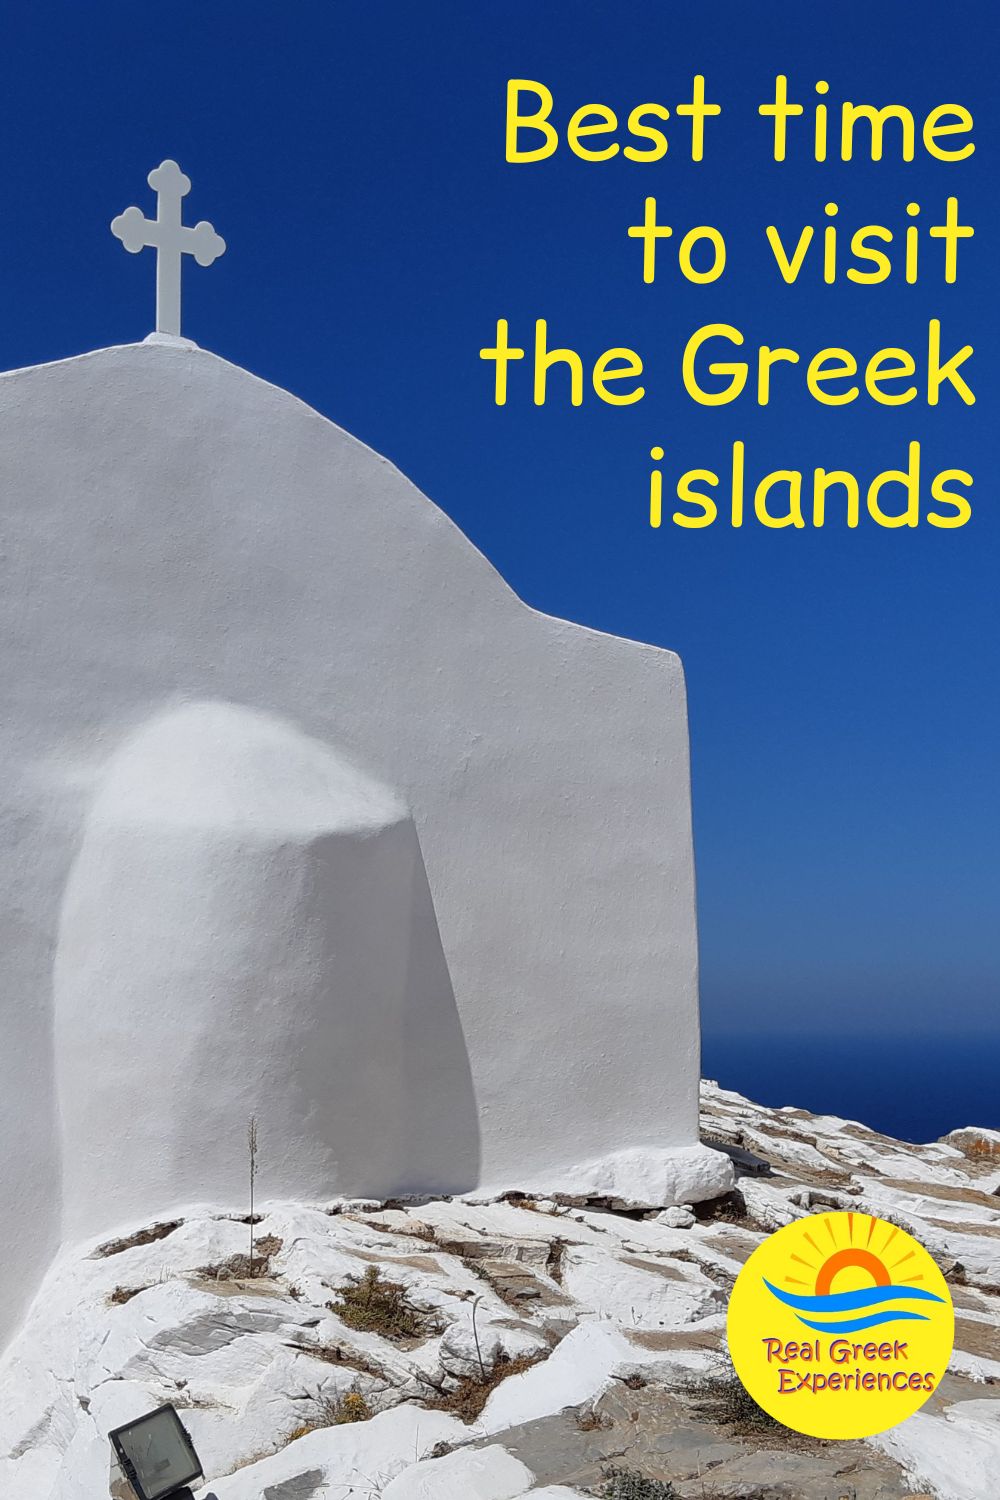 When is the best time of year to visit the Greek islands